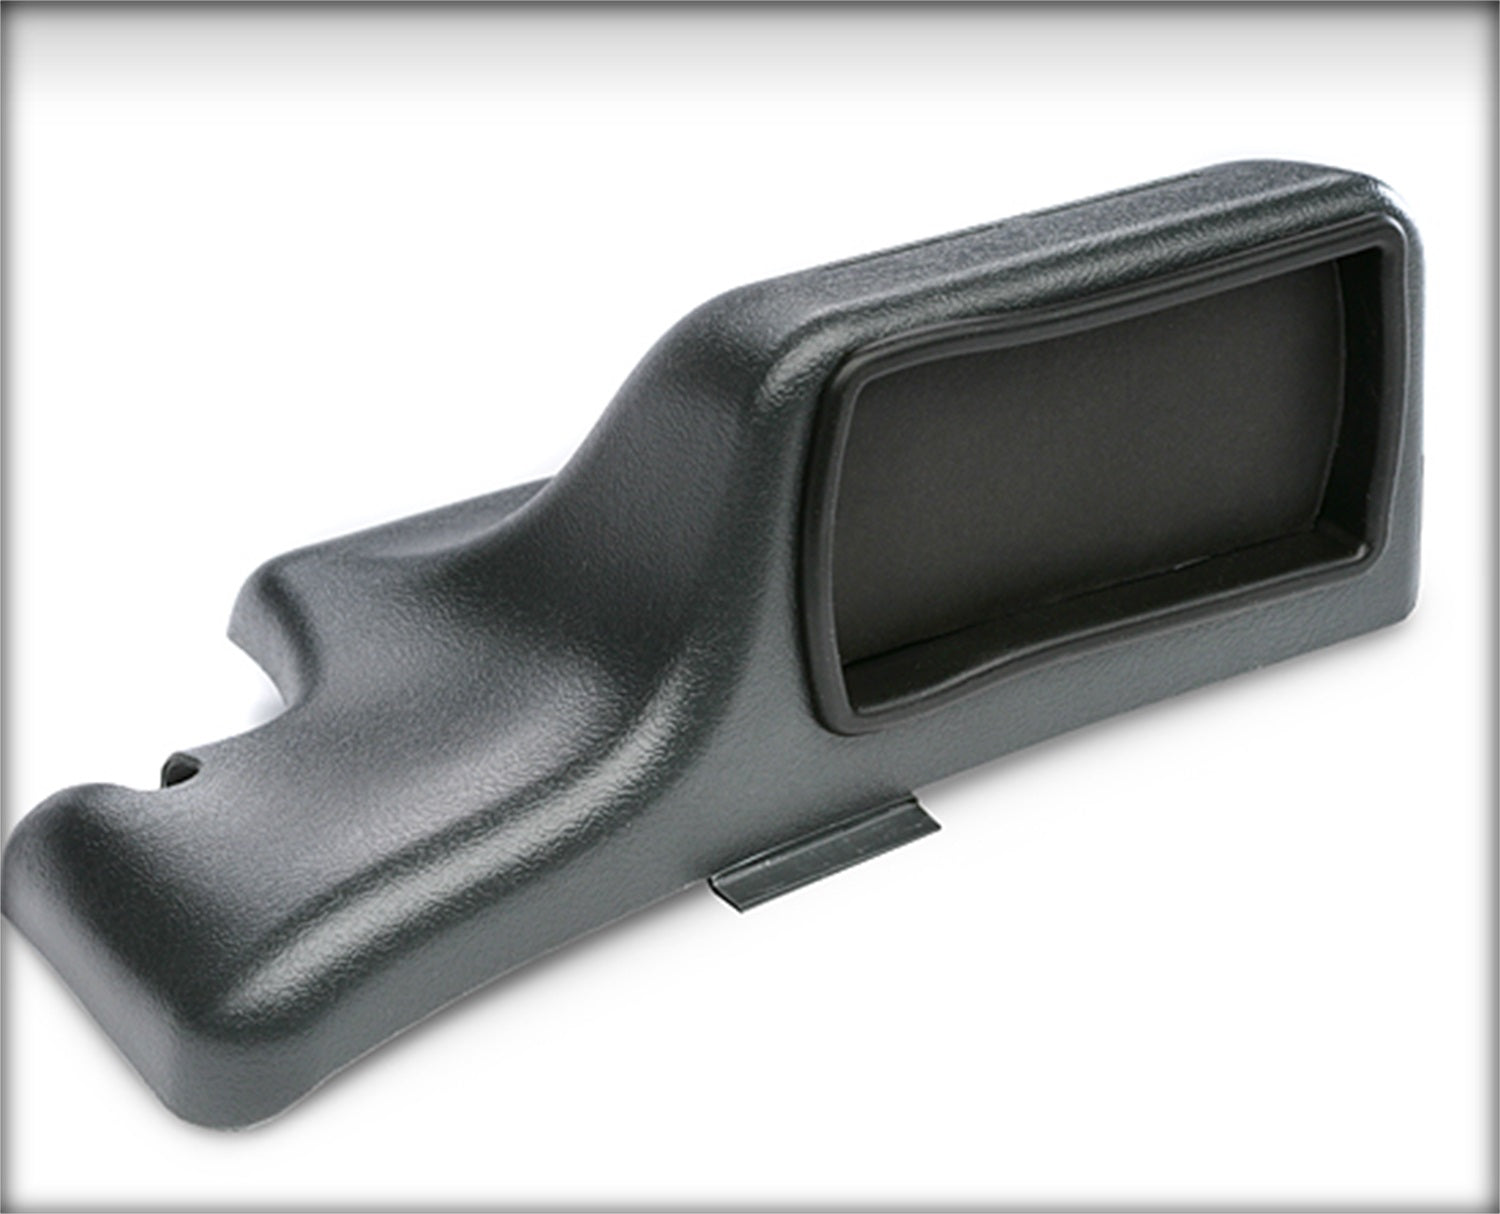 2001-2007 Chevy/GM dash pod comes with cts and cts2 adaptors